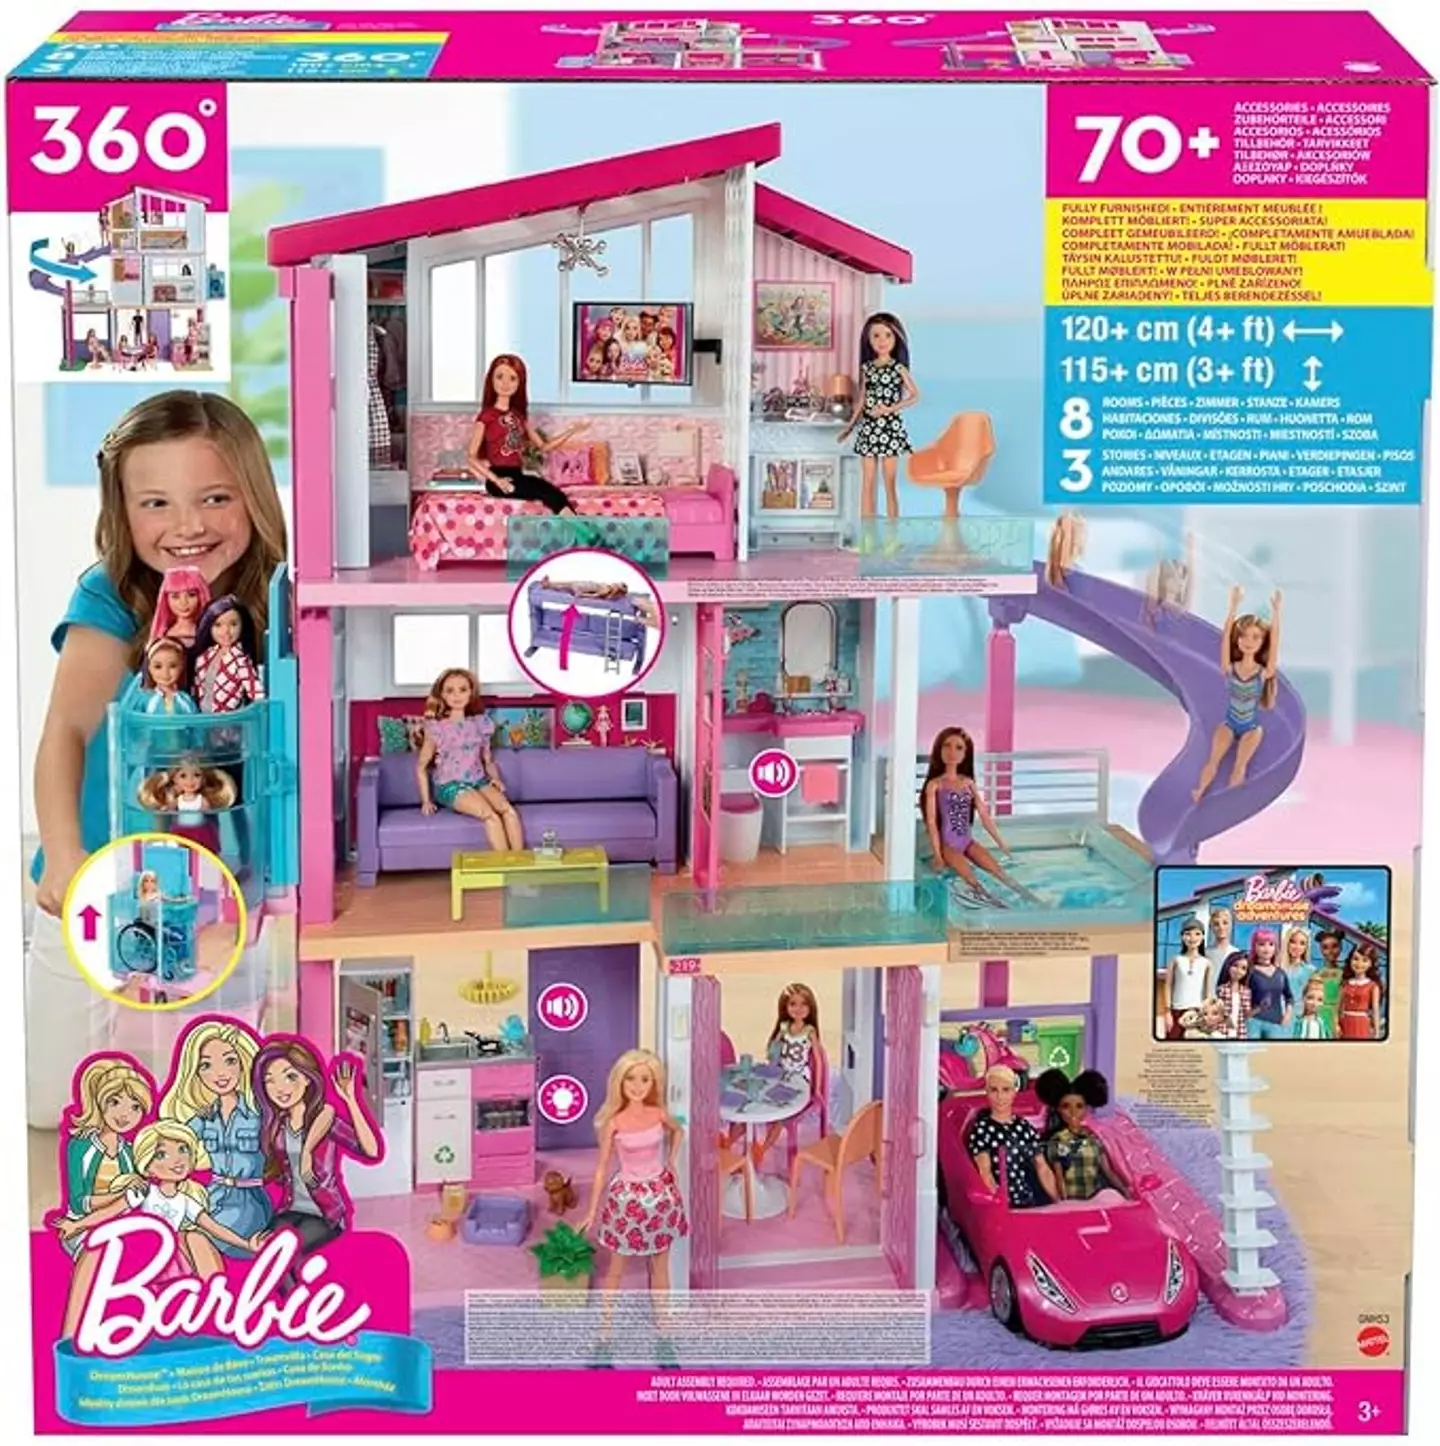 The dreamhouse comes with 70 pieces to play with.